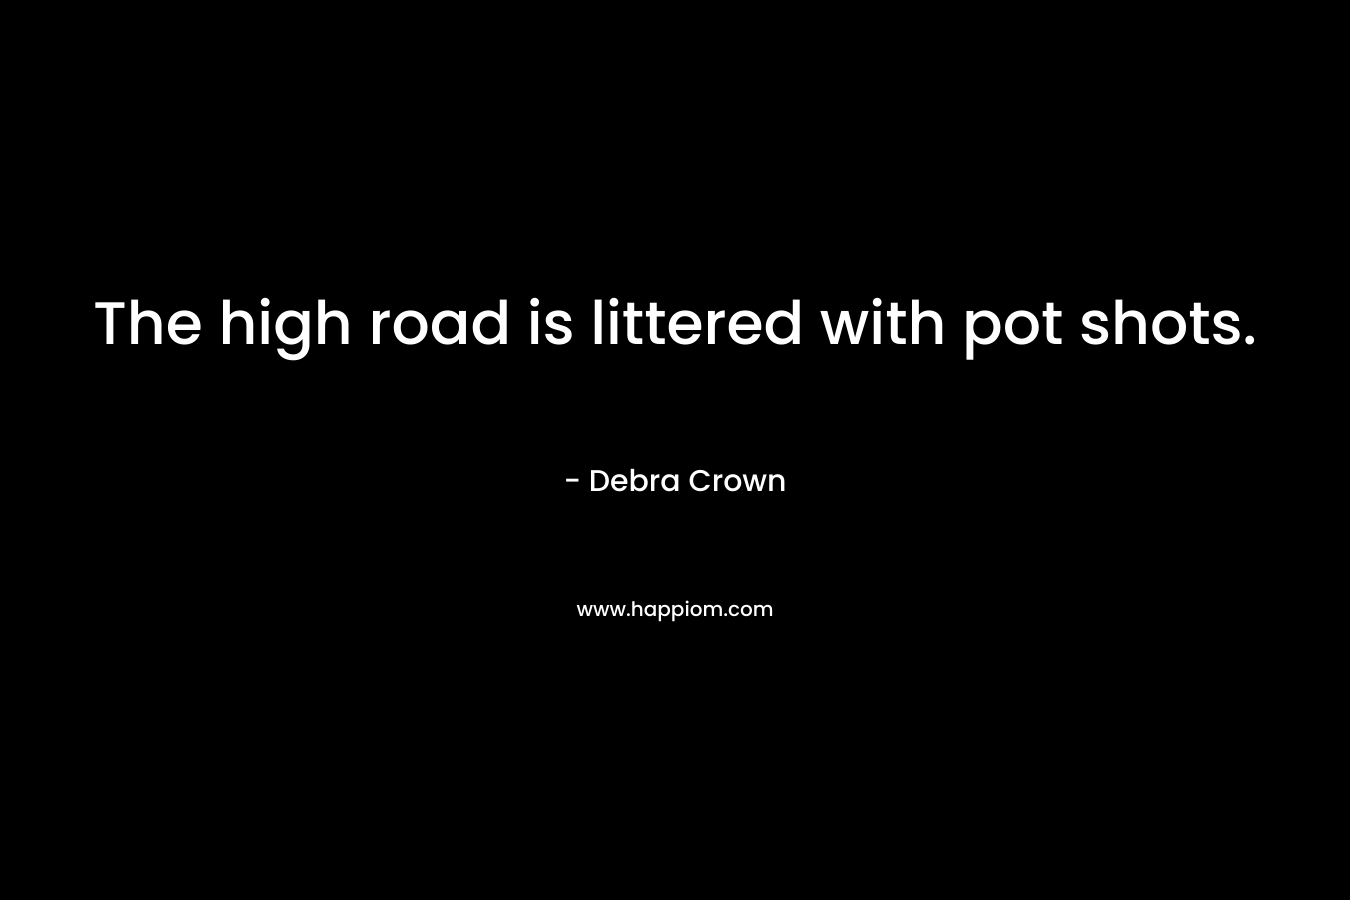 The high road is littered with pot shots.